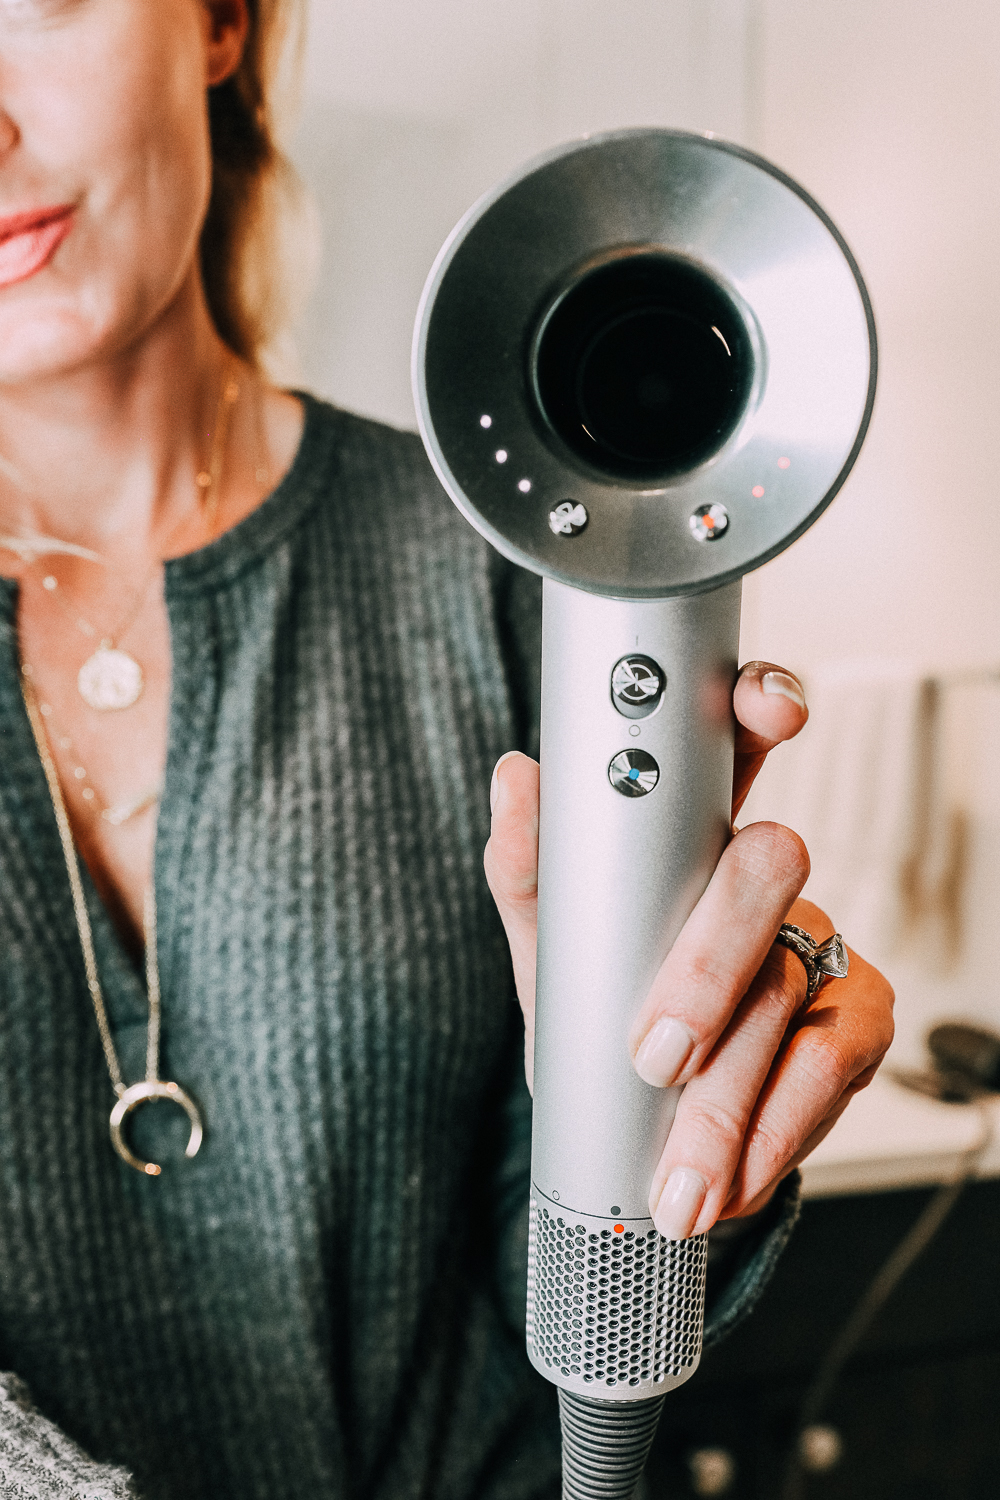 Best Selling Gifts QVC featuring the Dyson hair dryer in white and silver